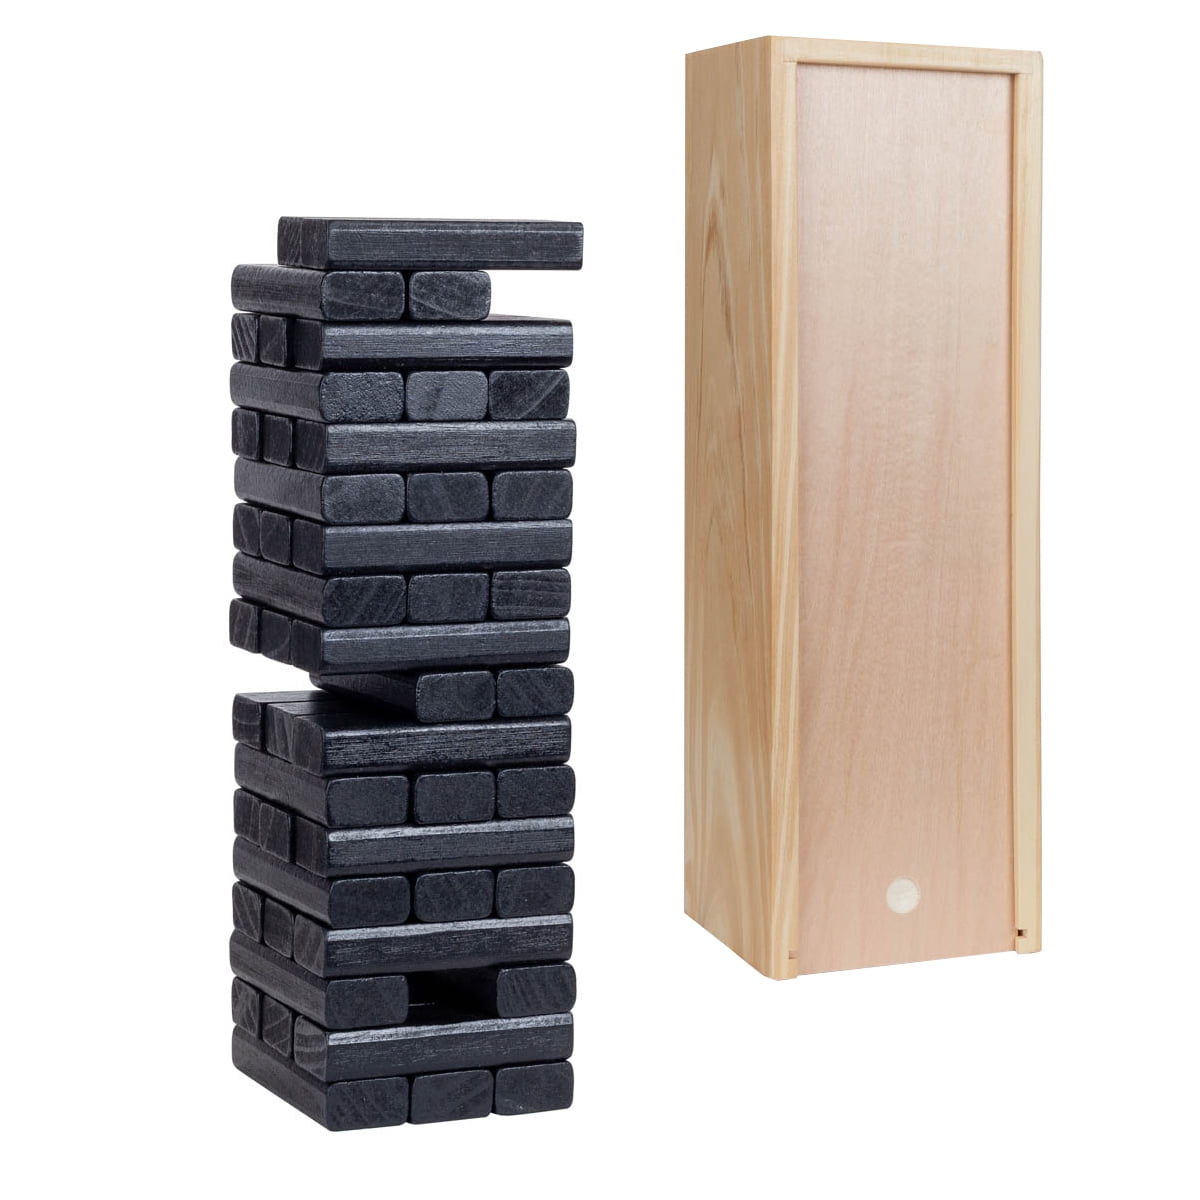 images./games/wood-blocks/cover-1606